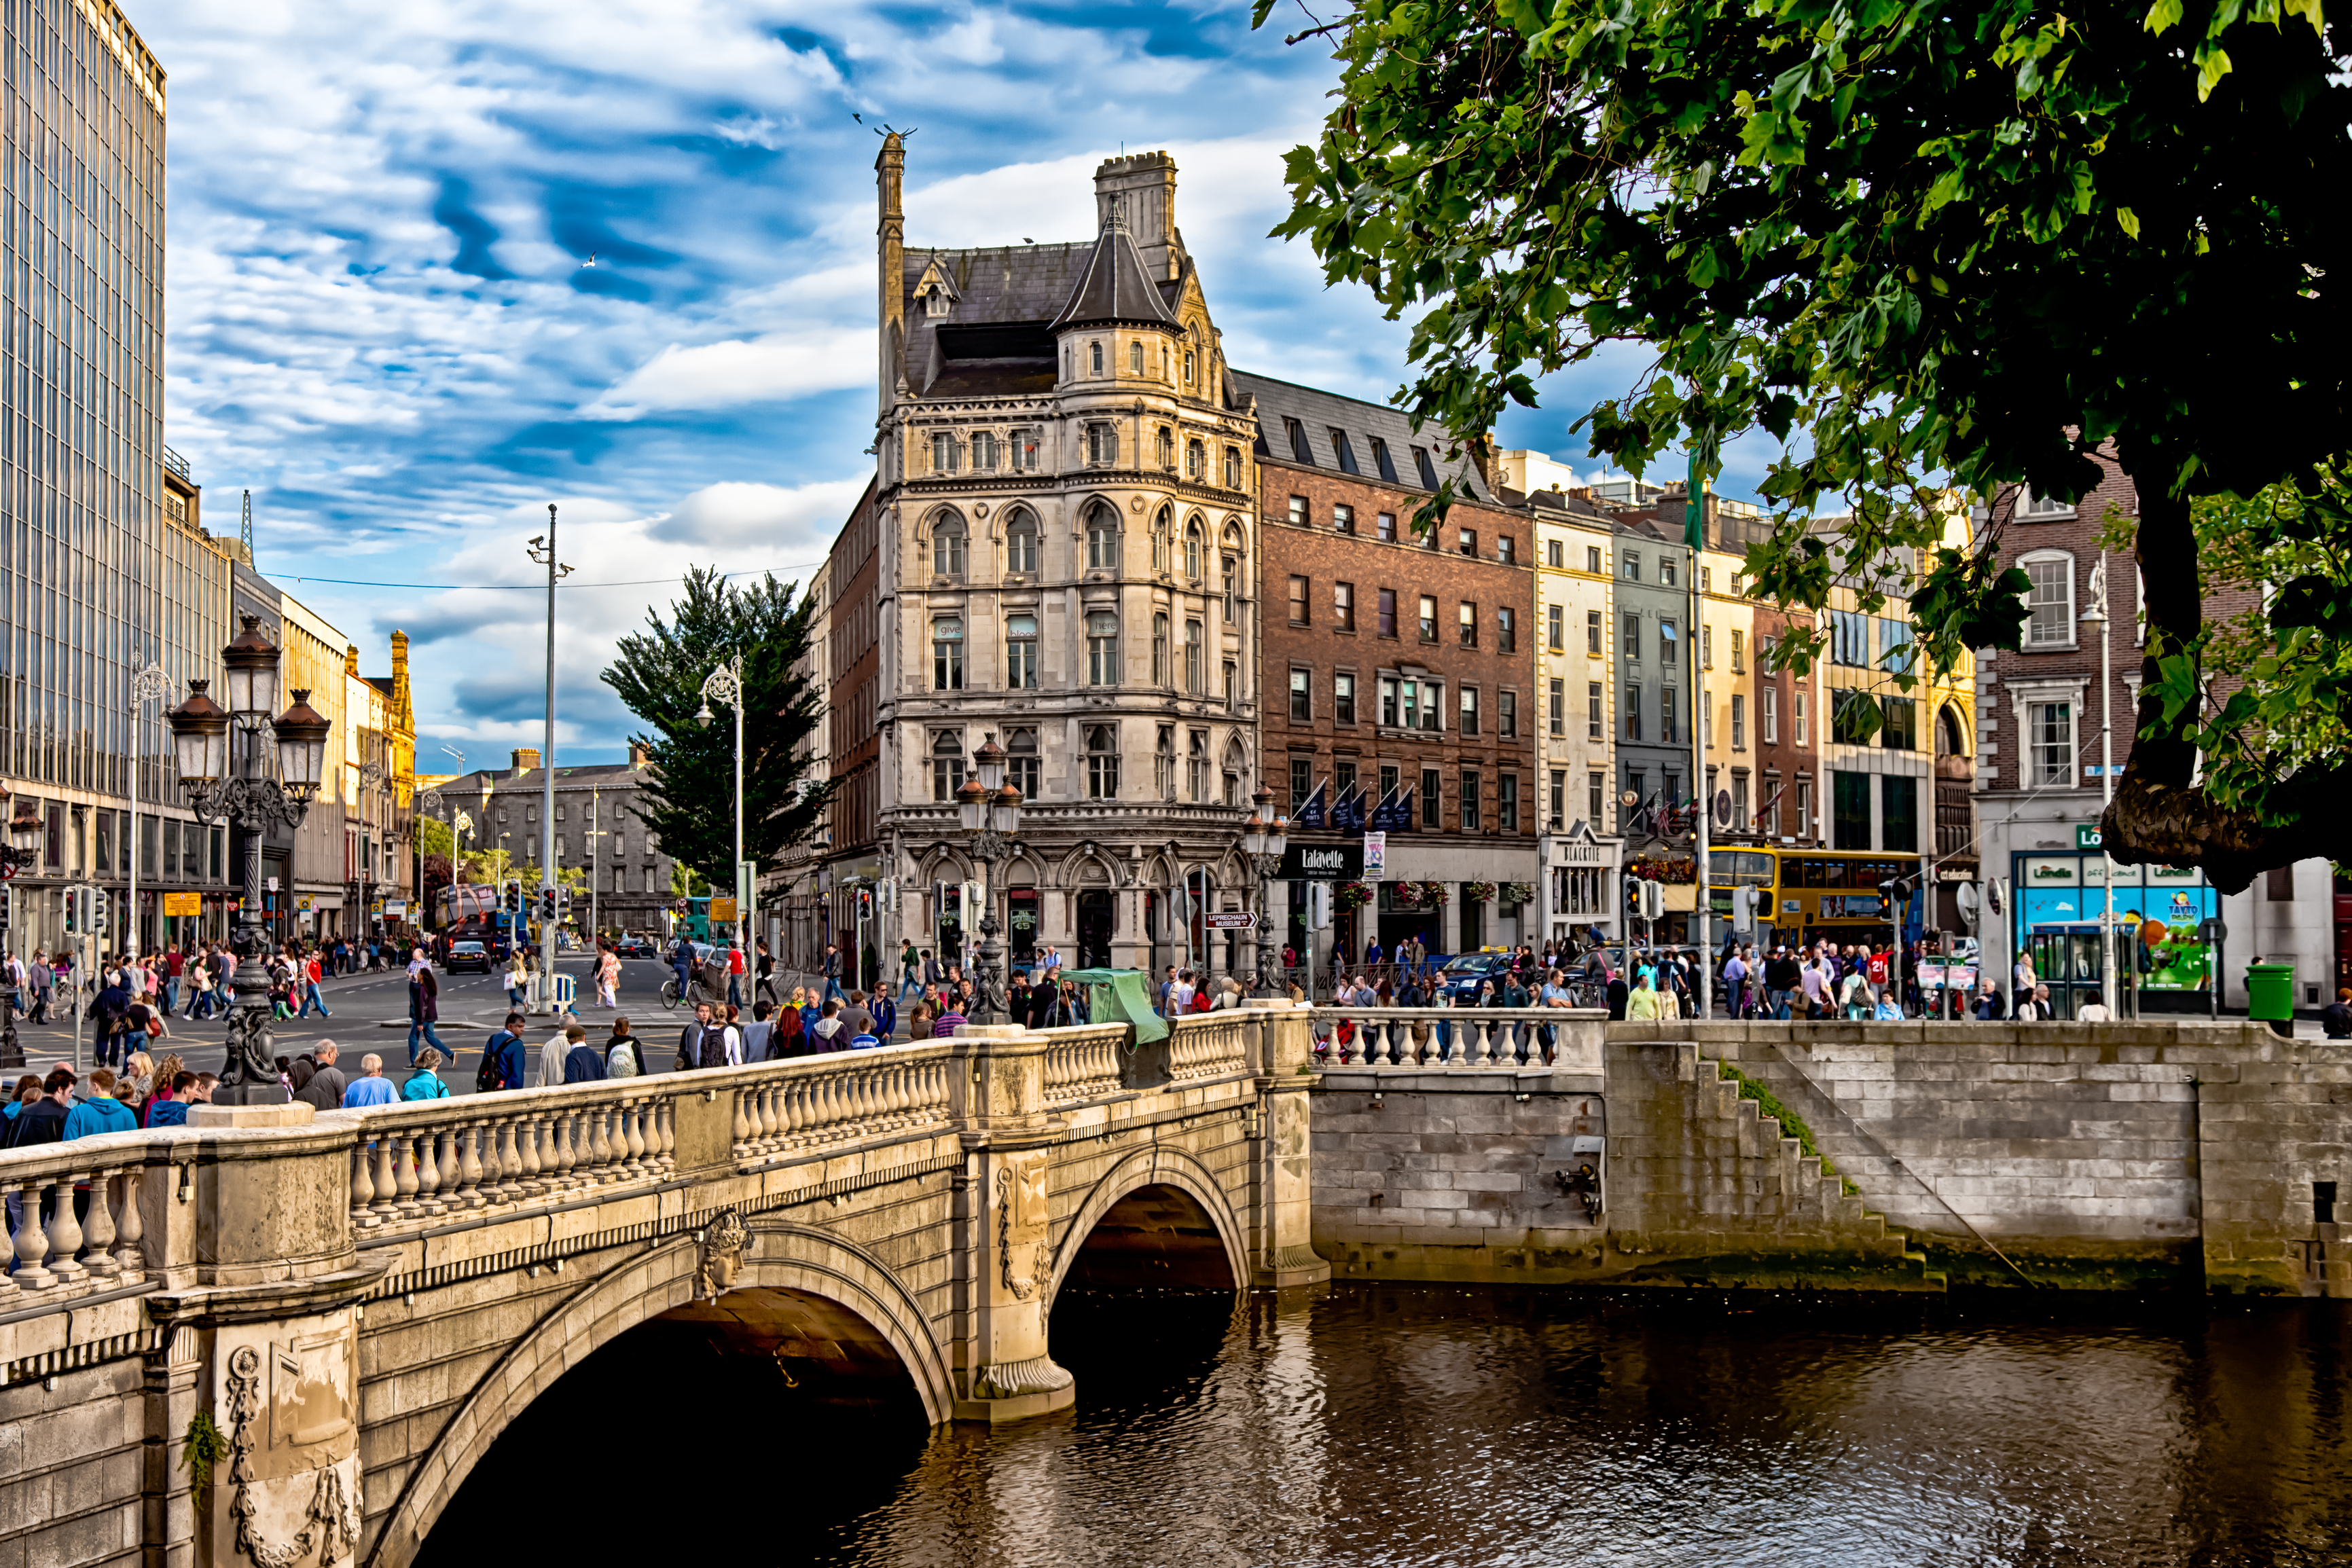 More cities added! Flights to Dublin in the $400s to $500s round-trip